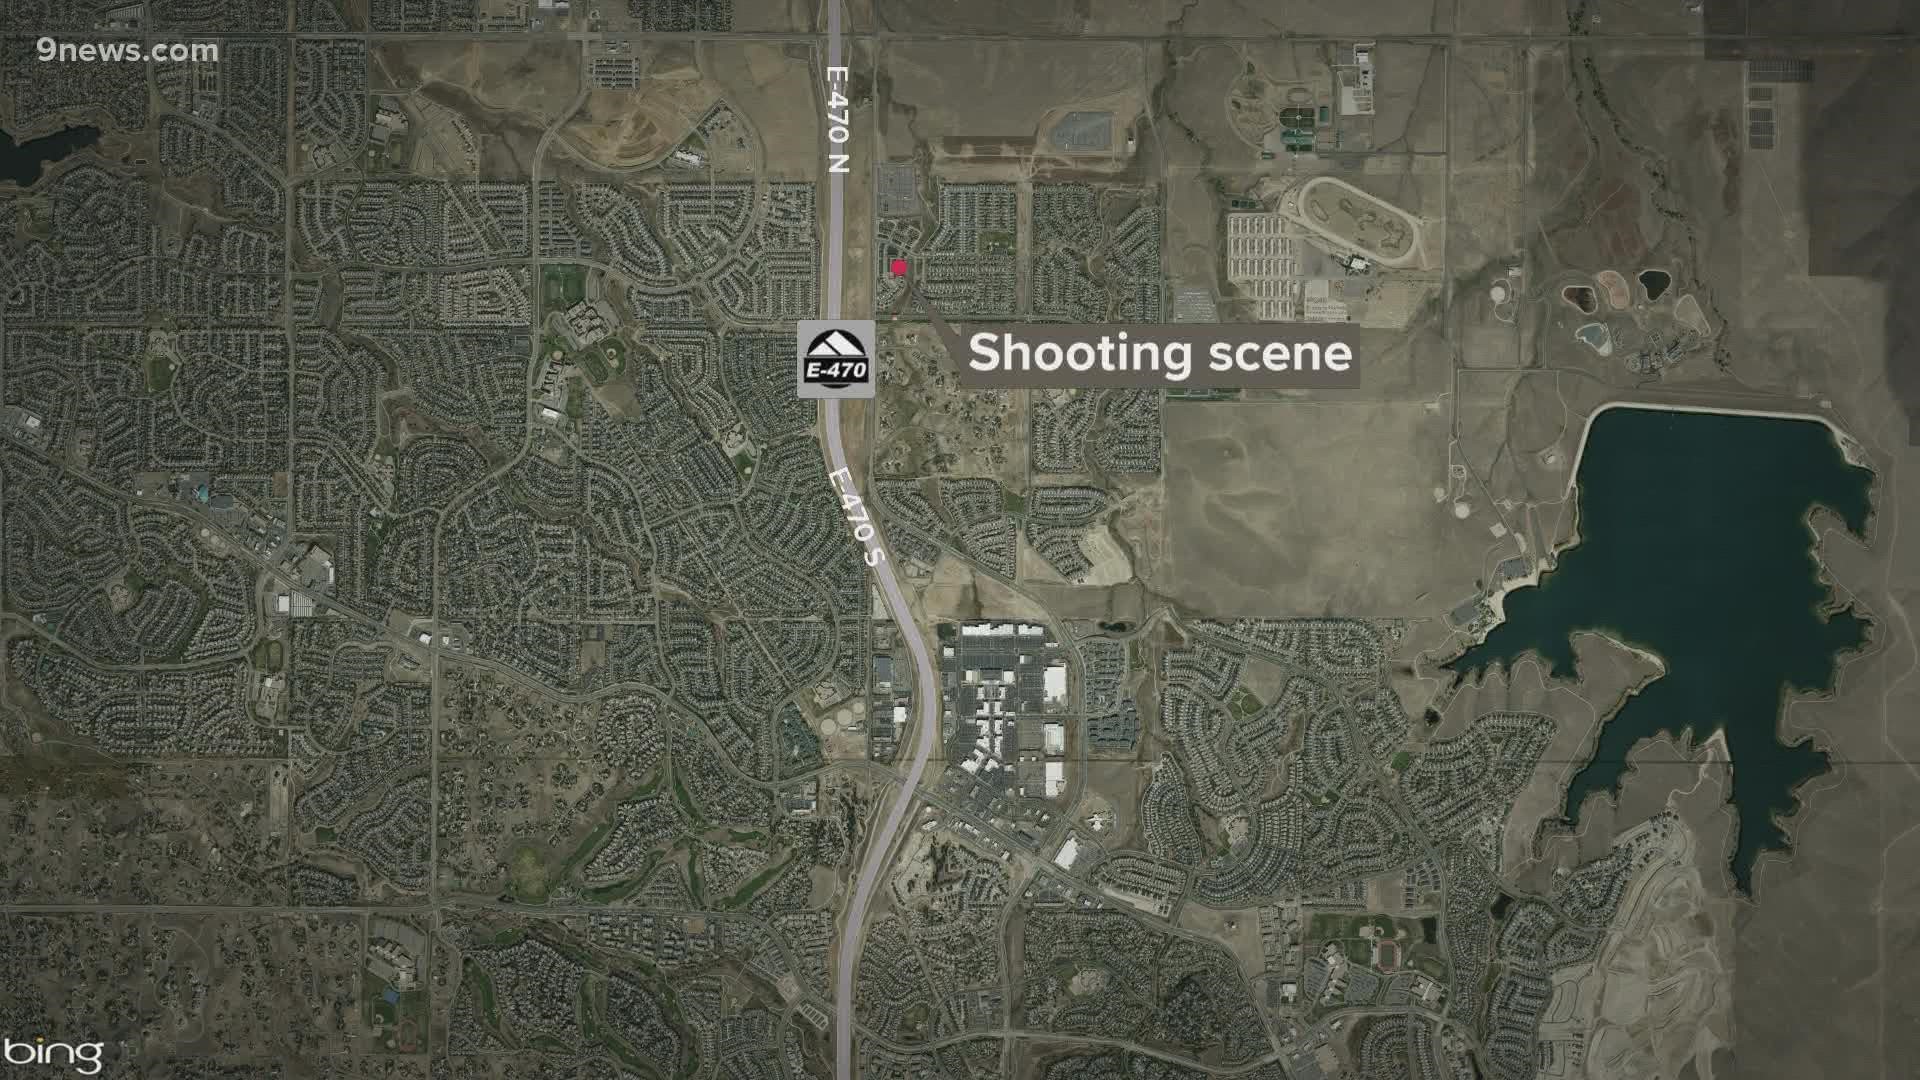 No arrests had been made in the shooting late Wednesday in southeast Aurora.